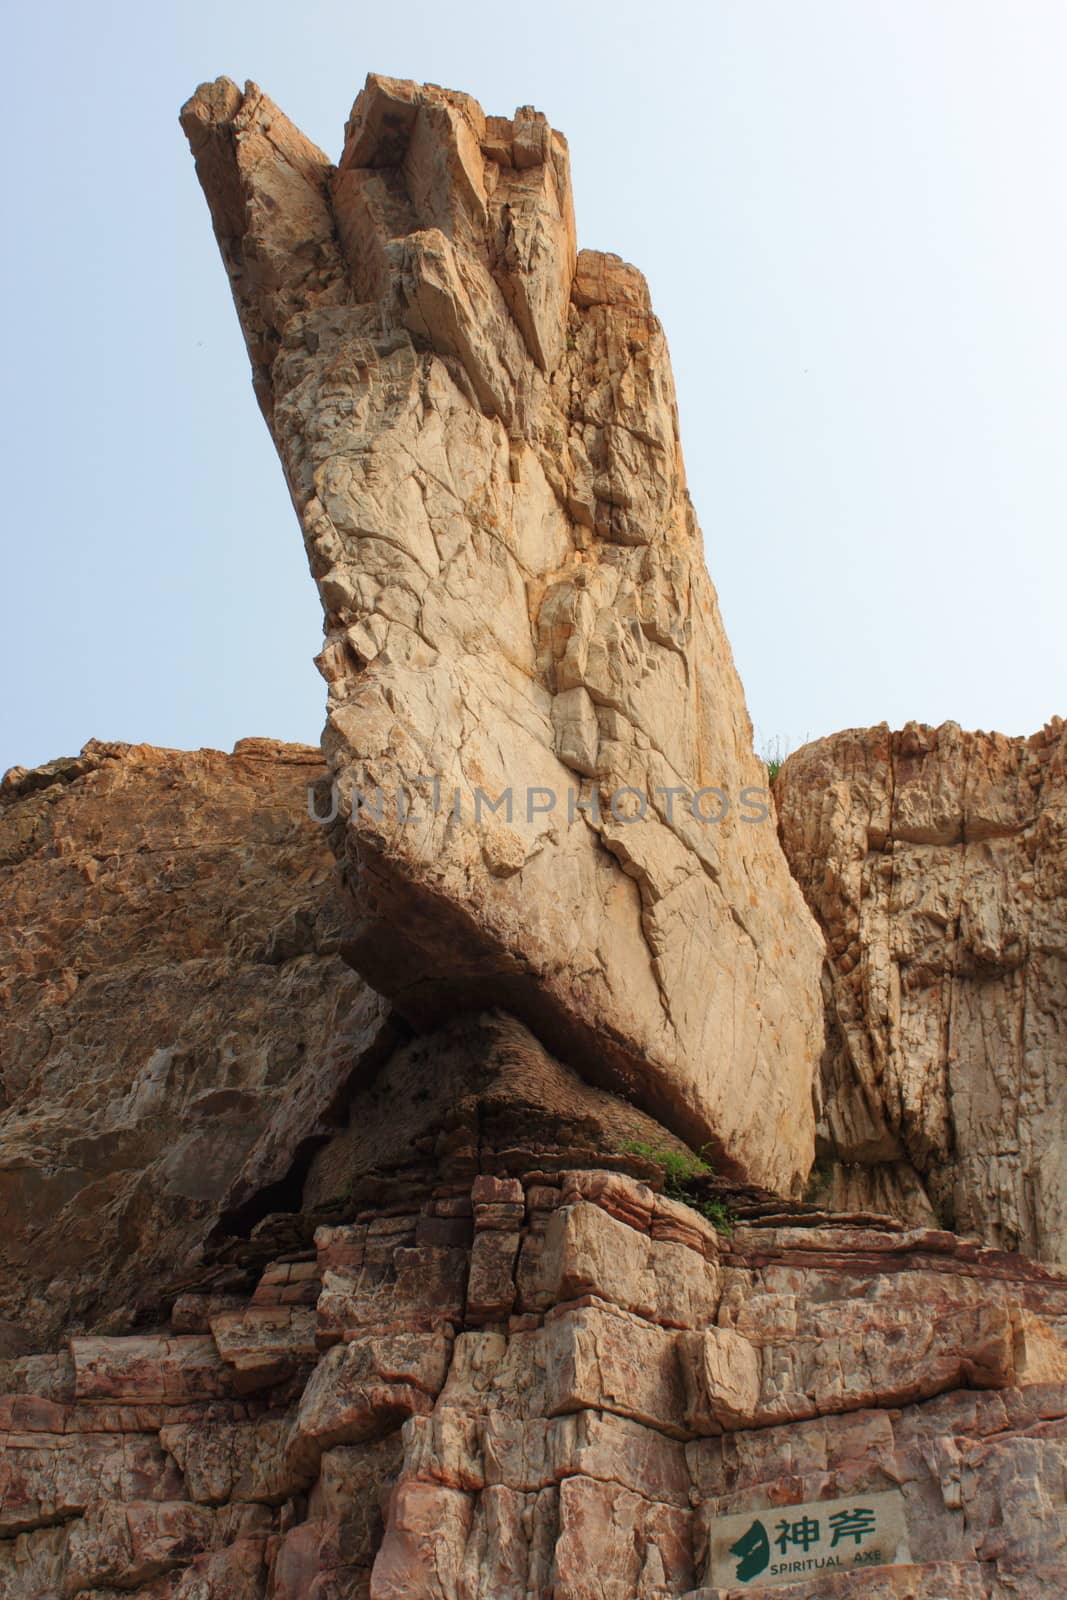 large stone axe, photo taken in changdao island, shandong province, china.